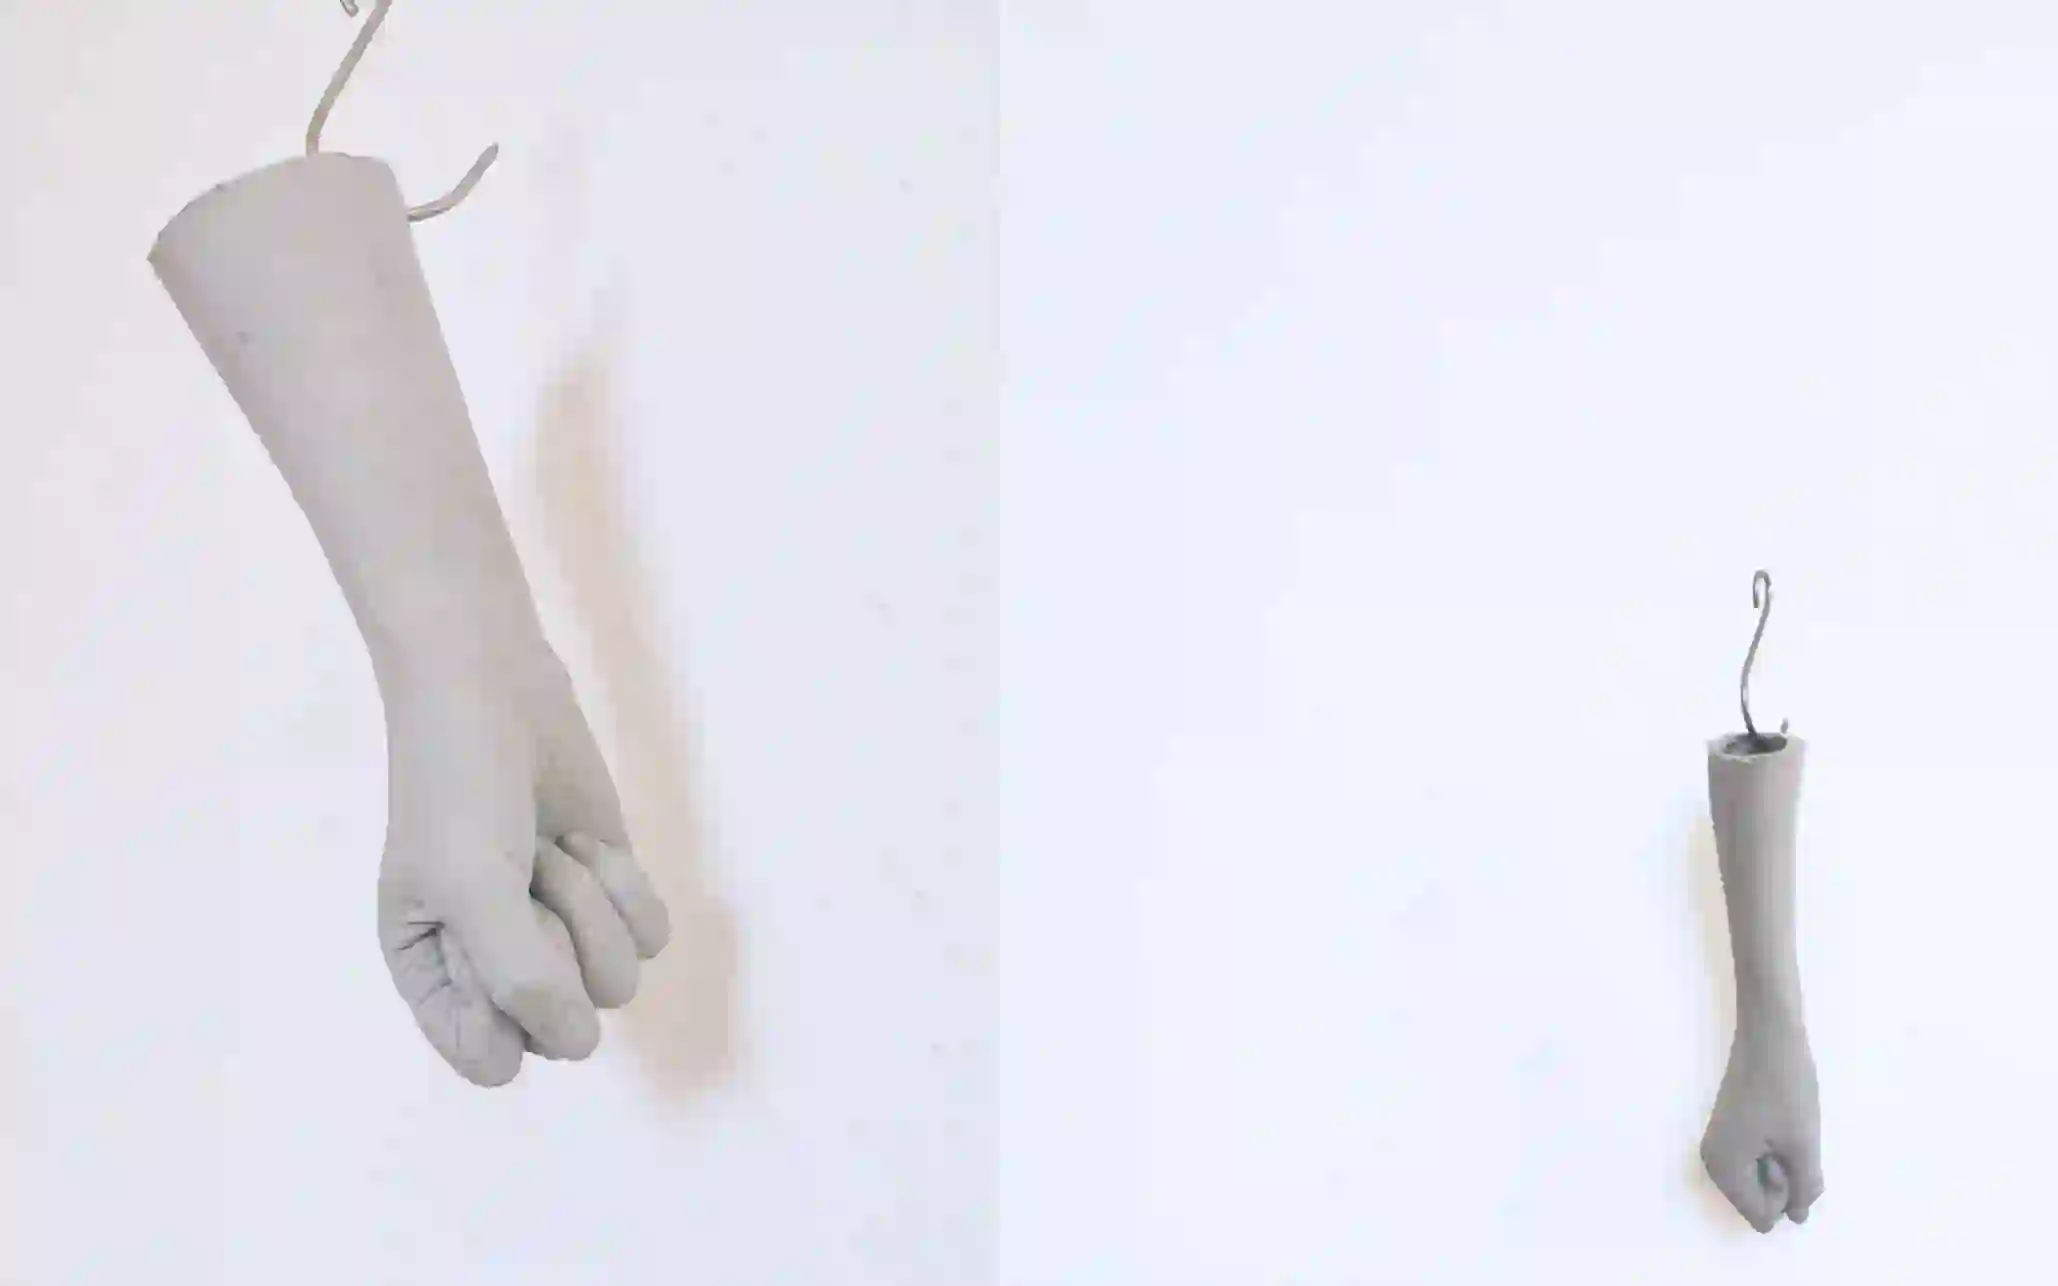 Still from video. Pensiero Plurale, On the Politics of Visibility (fist sculptures mounted on wall).
